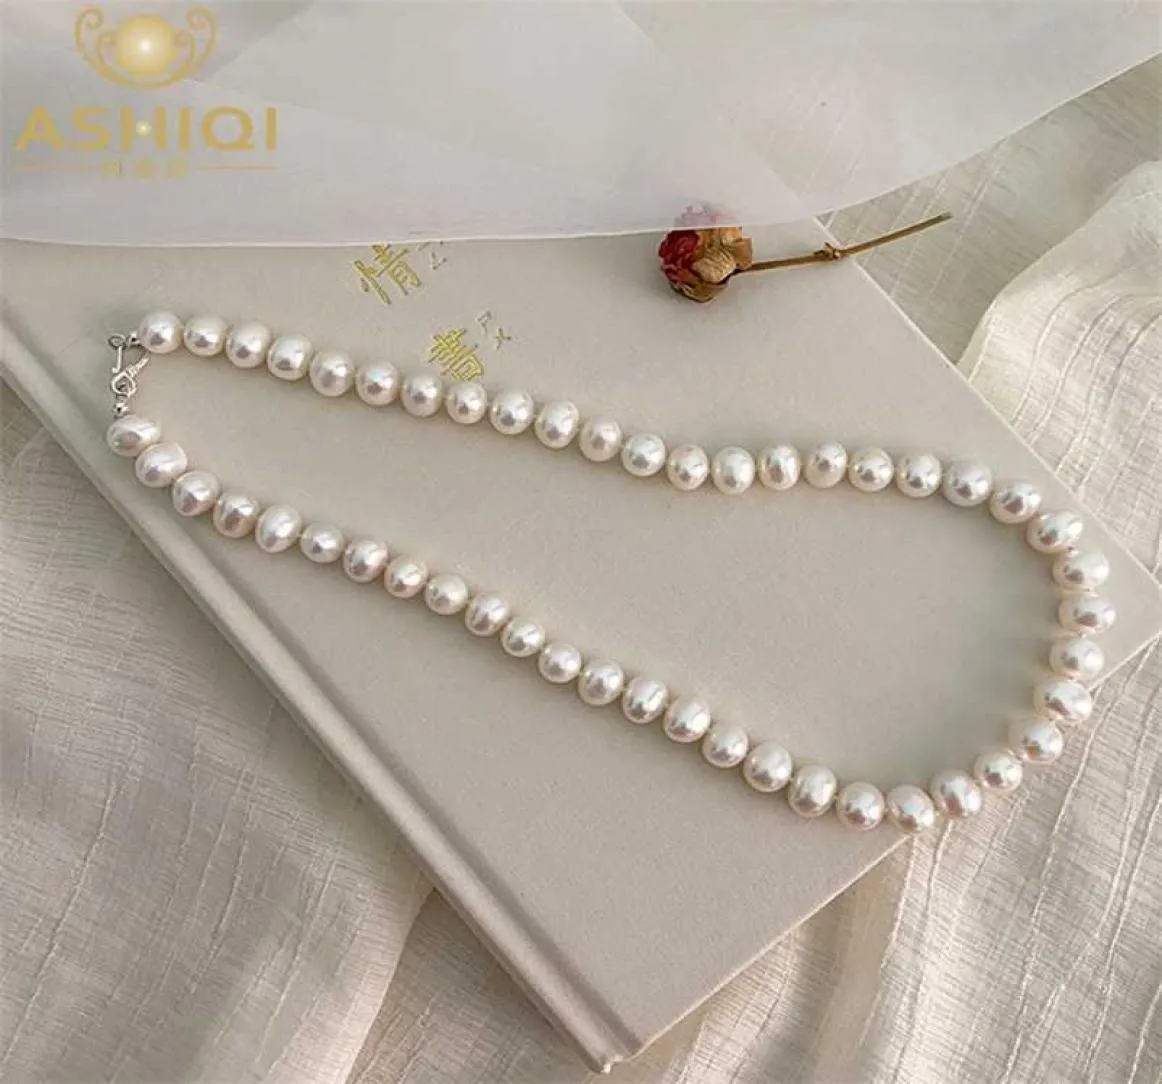 Ashiqi Natural Fraphwater Pearl Necklace 925 Sterling Silver Button Jewelry for Women Fashion Persuality Wedding Gift 2201197925560